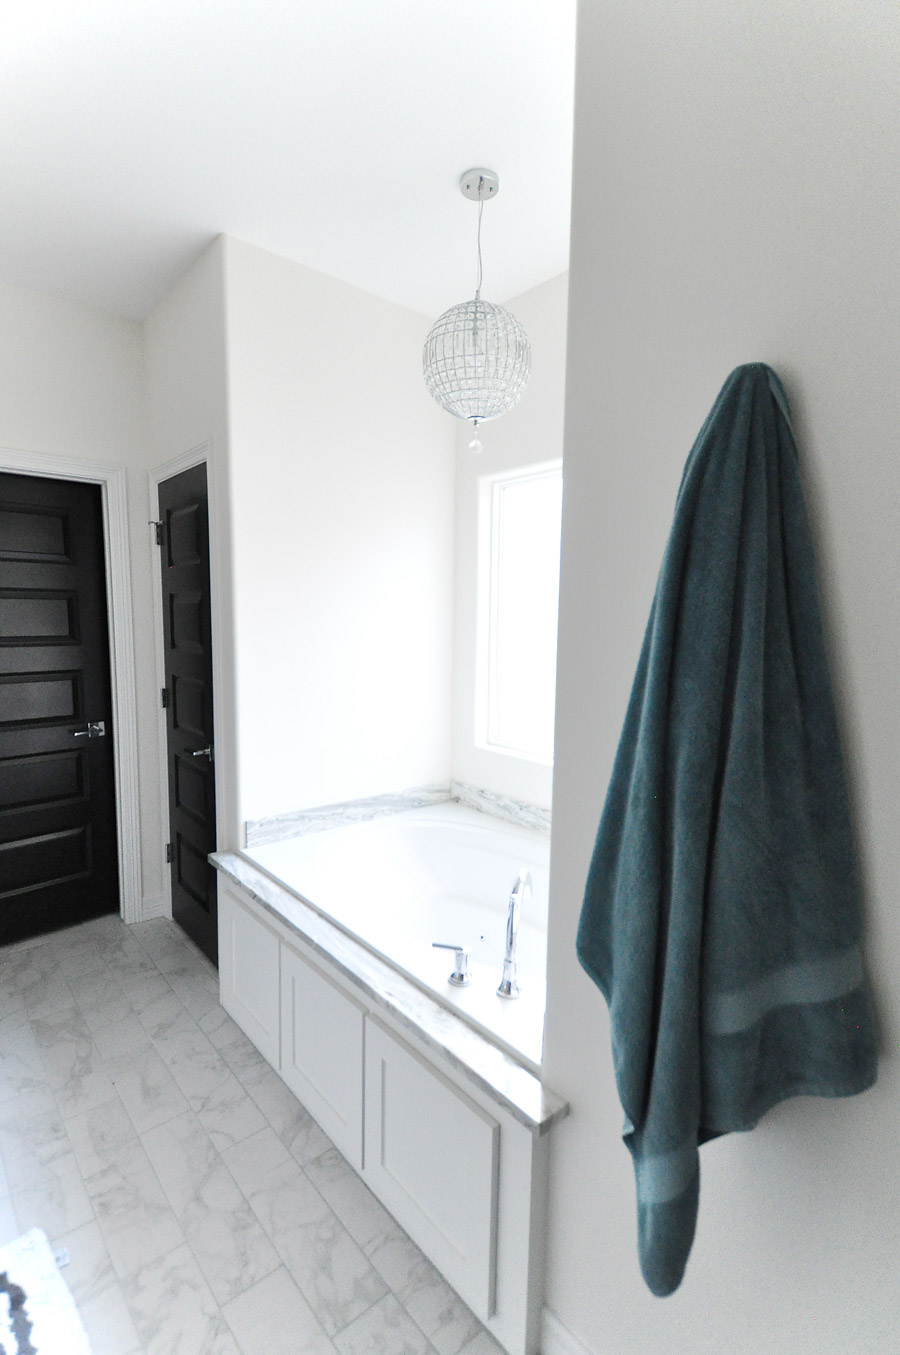 Black interior doors and white wall create a luxe and dramatic master bathroom retreat.